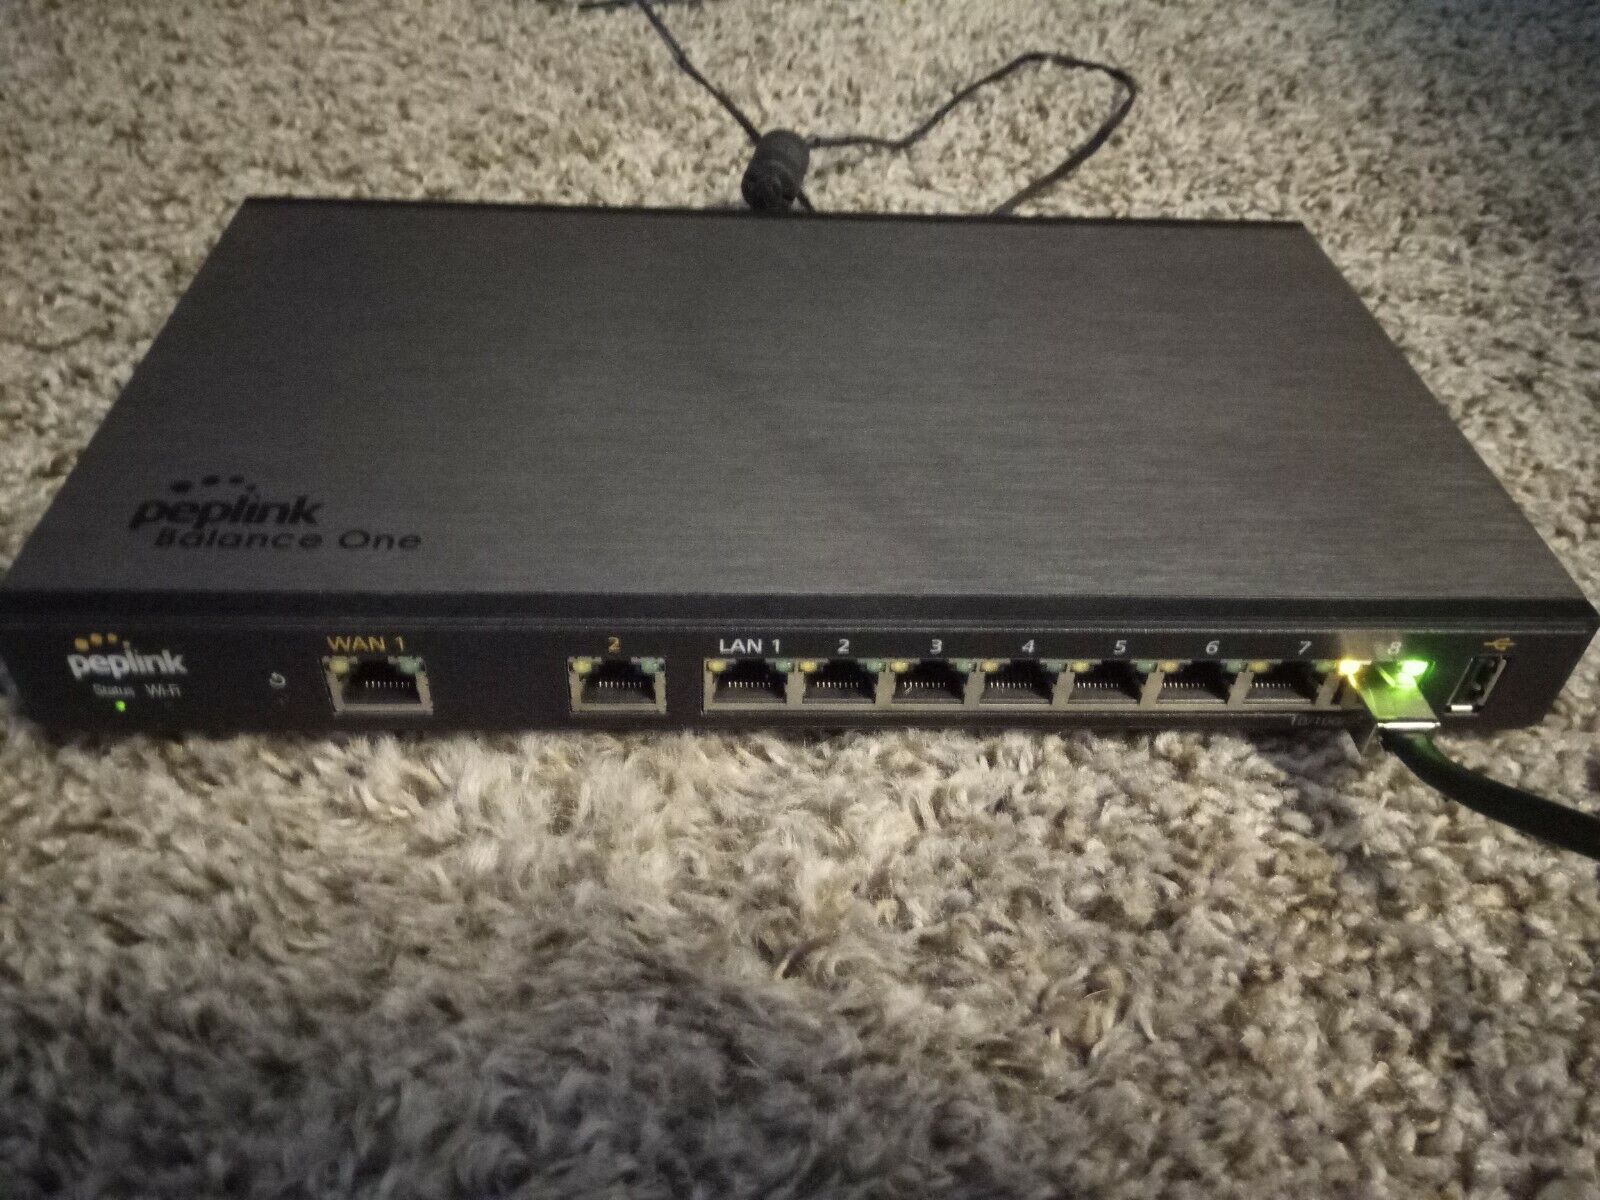 Peplink Balance One BPL-ONE Dual WAN Router w/ Wifi and USB Connectivity